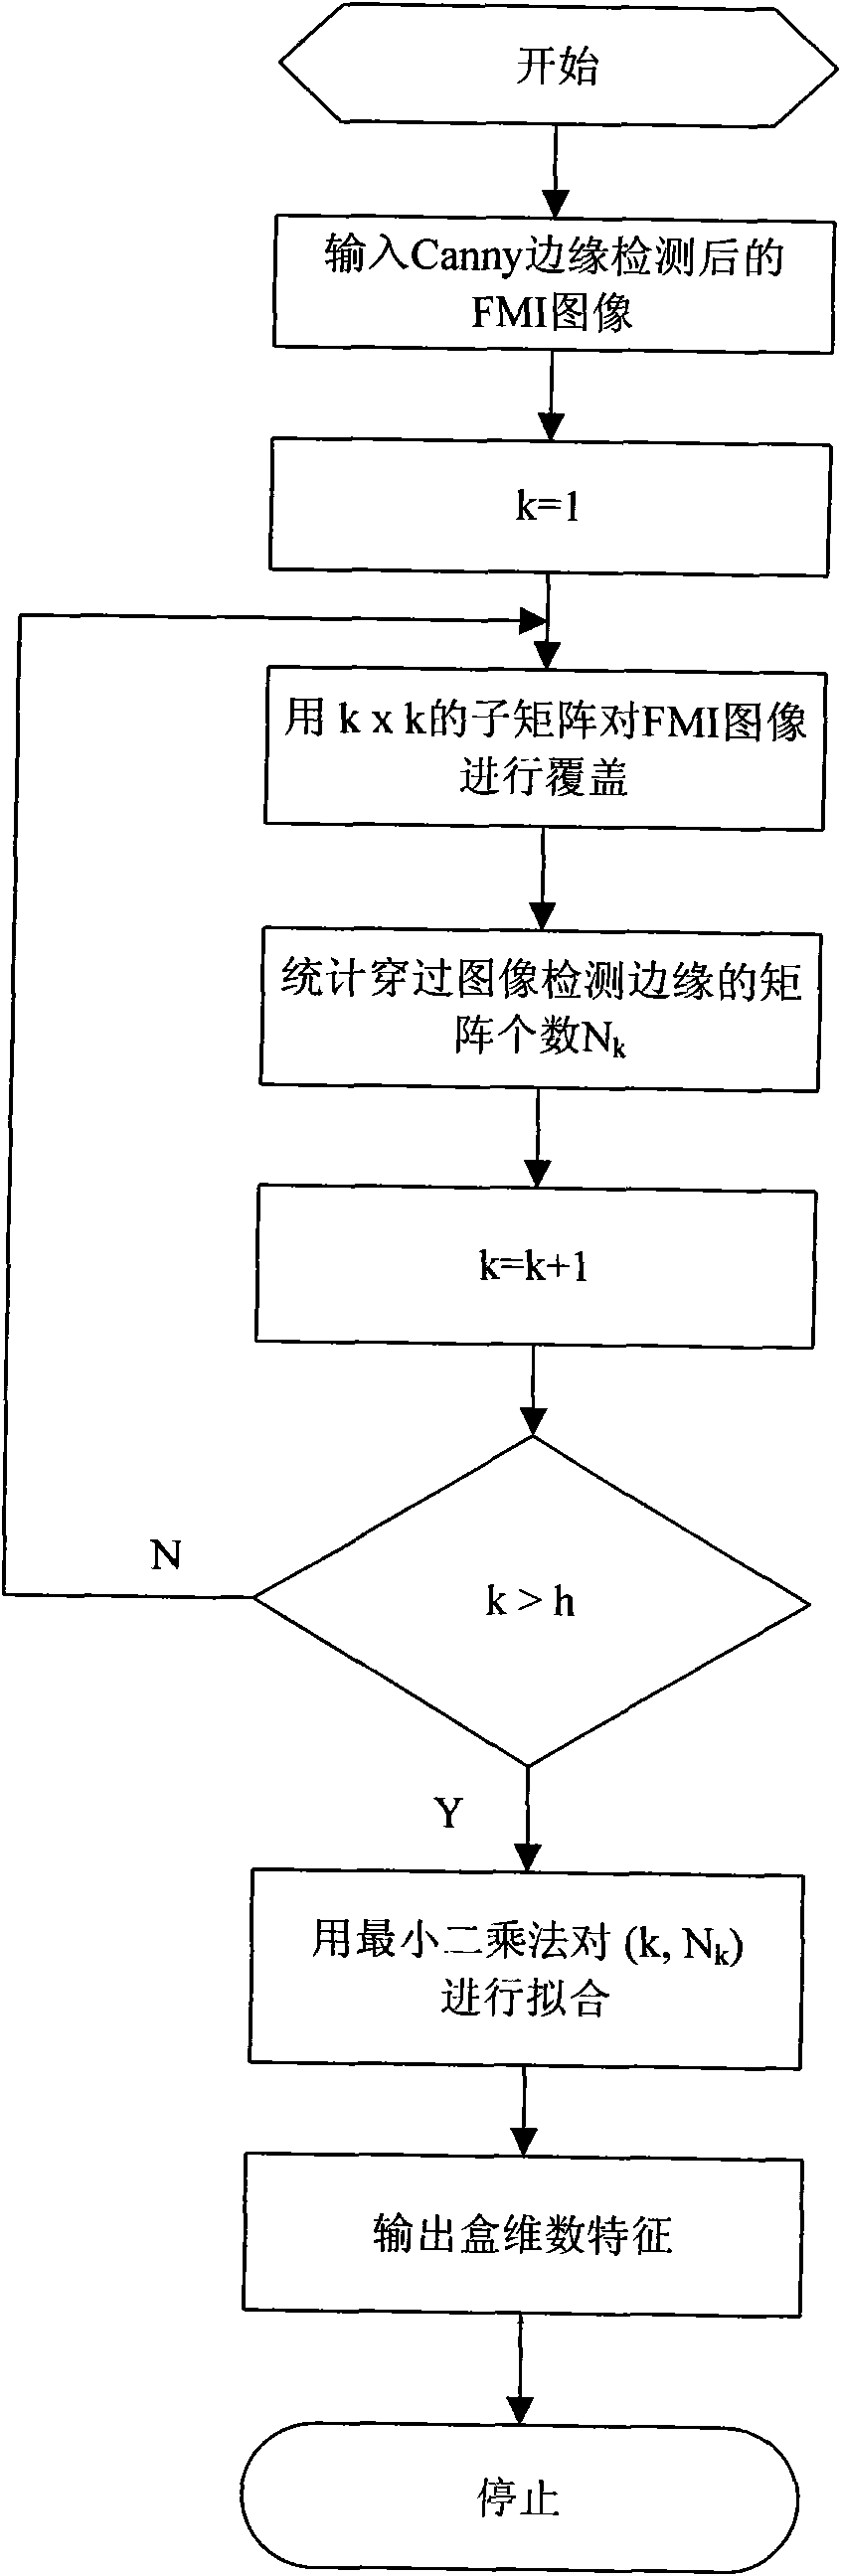 Method for recognizing rock type